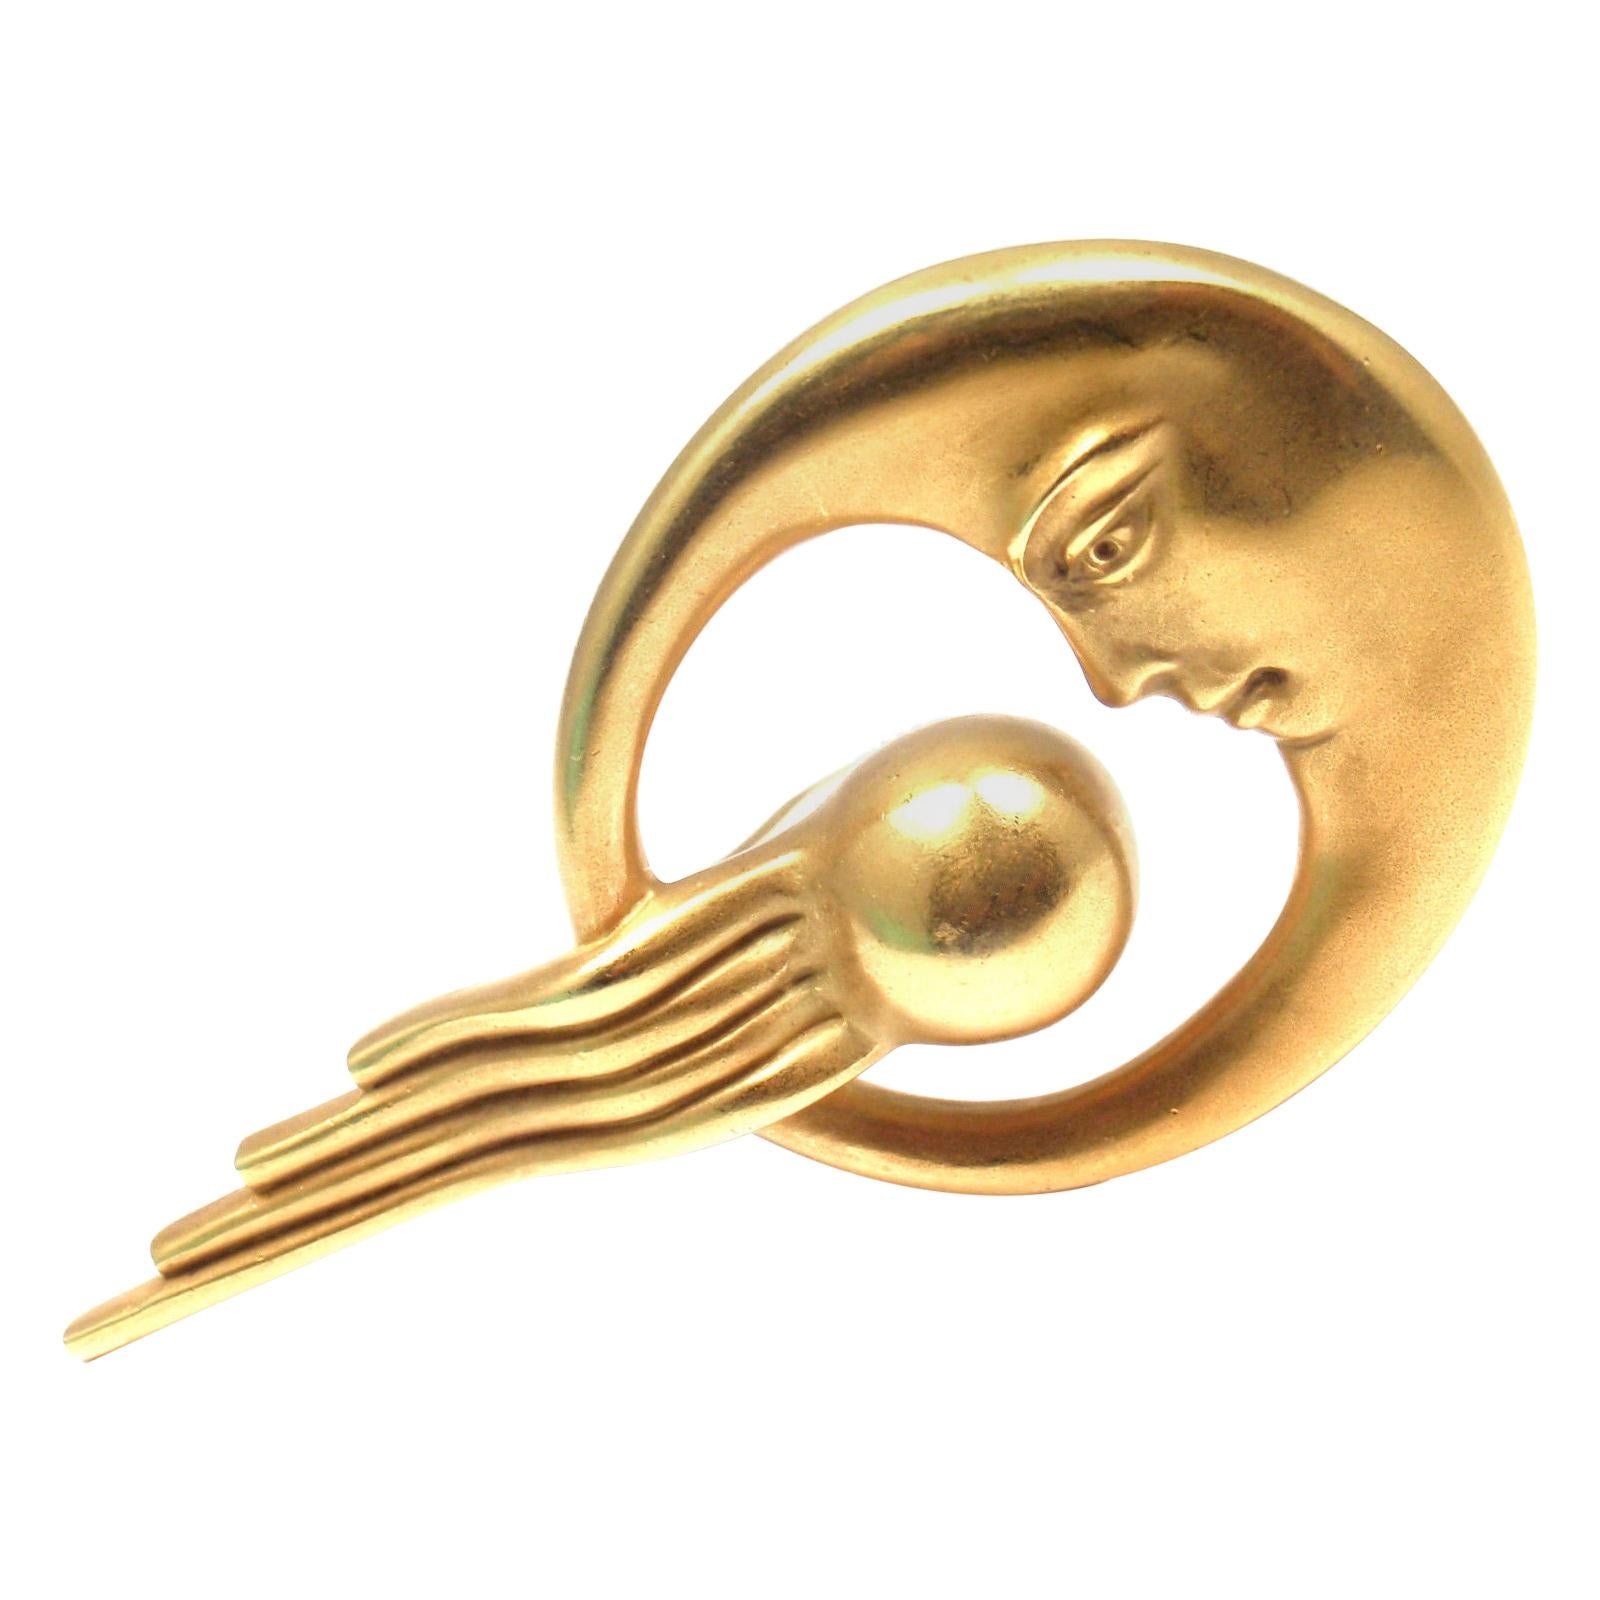 Barry Kieselstein Cord Moon Yellow Gold Large Pin Brooch